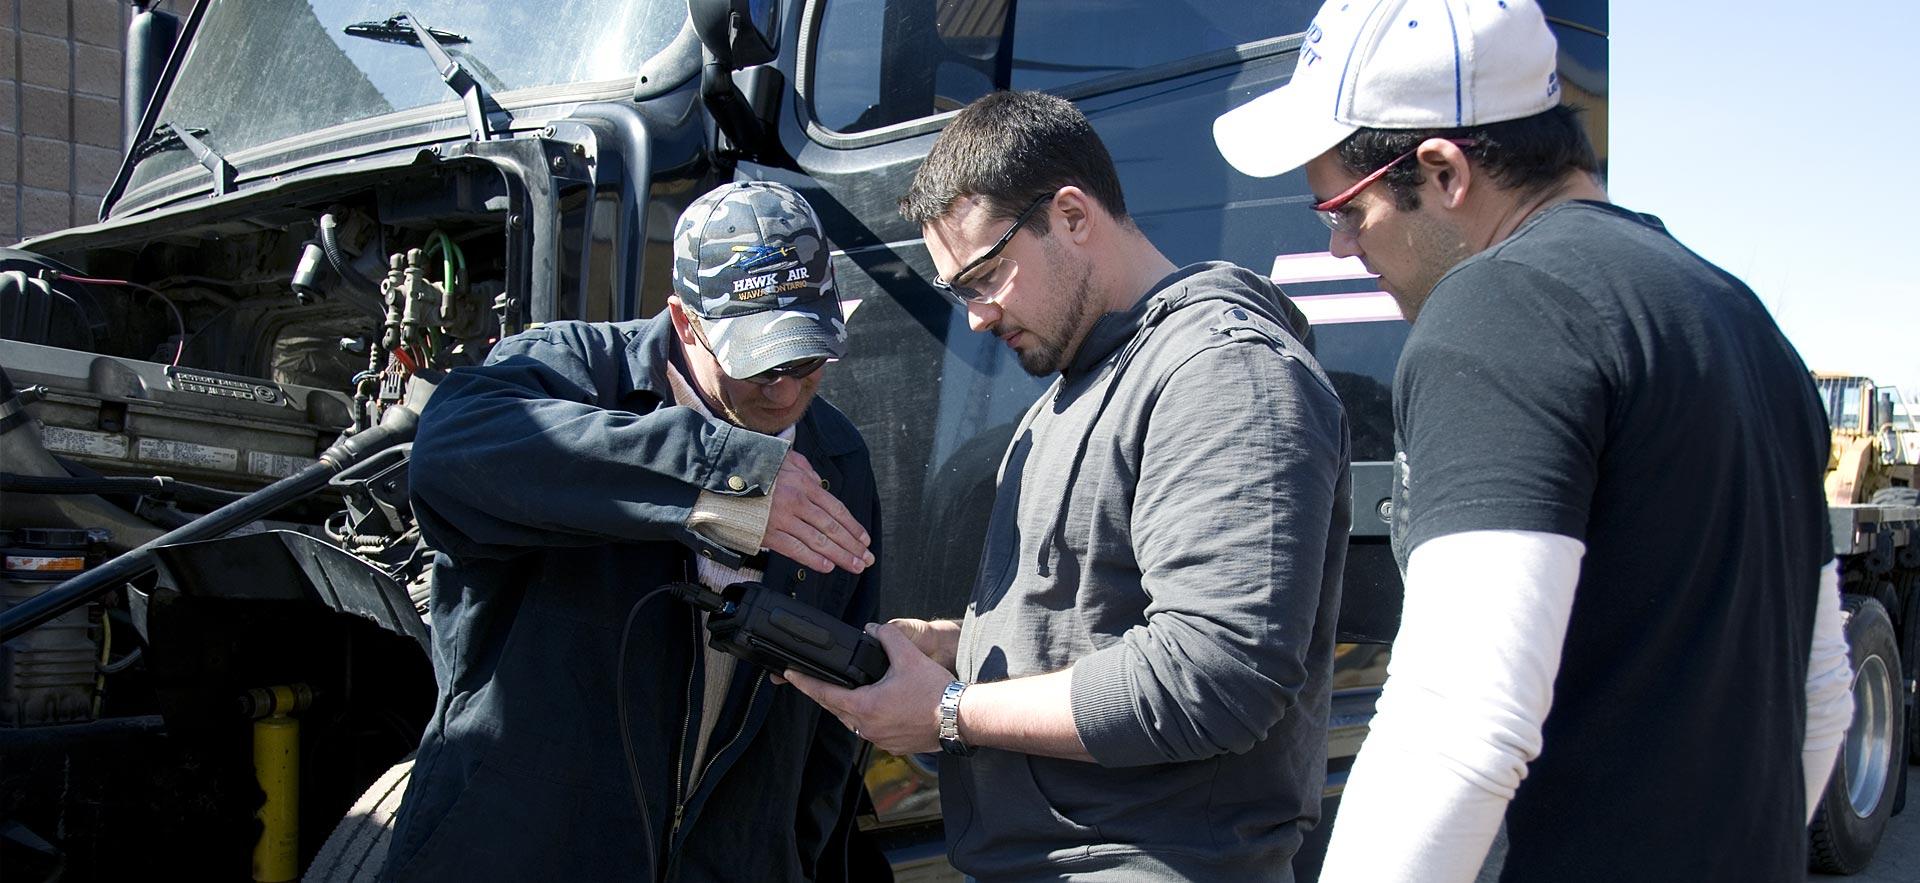 A group of male heavy equipment students discuss repairs on a truck.